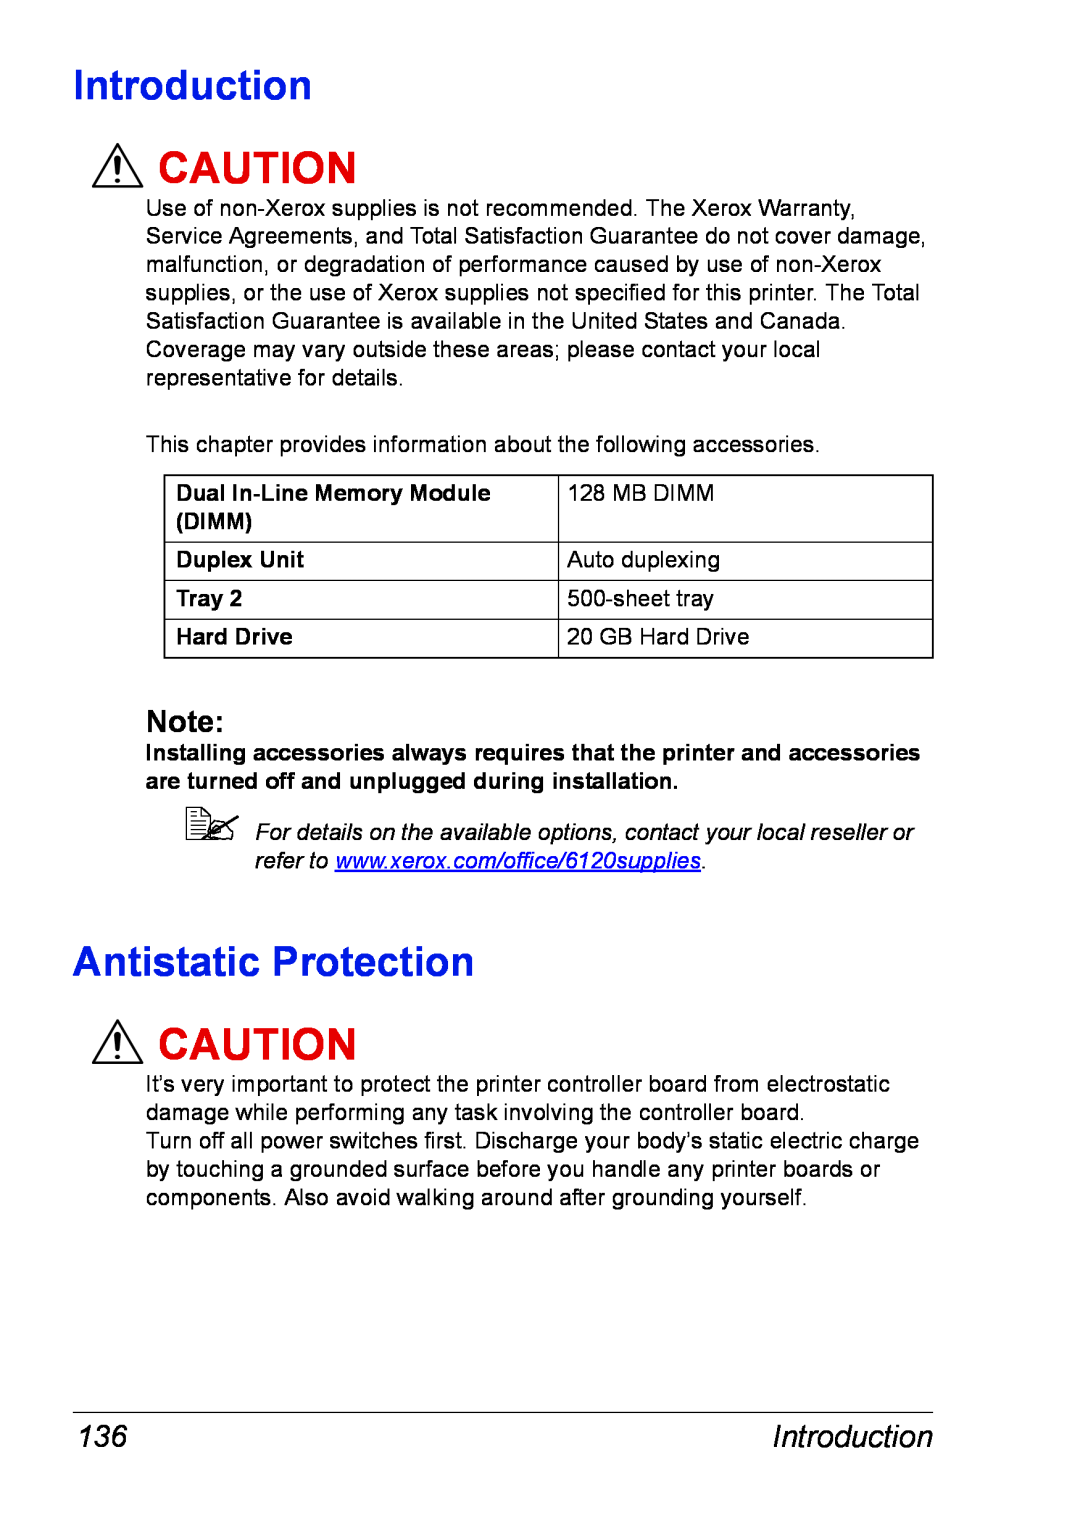 Xerox 6120 manual Antistatic Protection, Introduction 